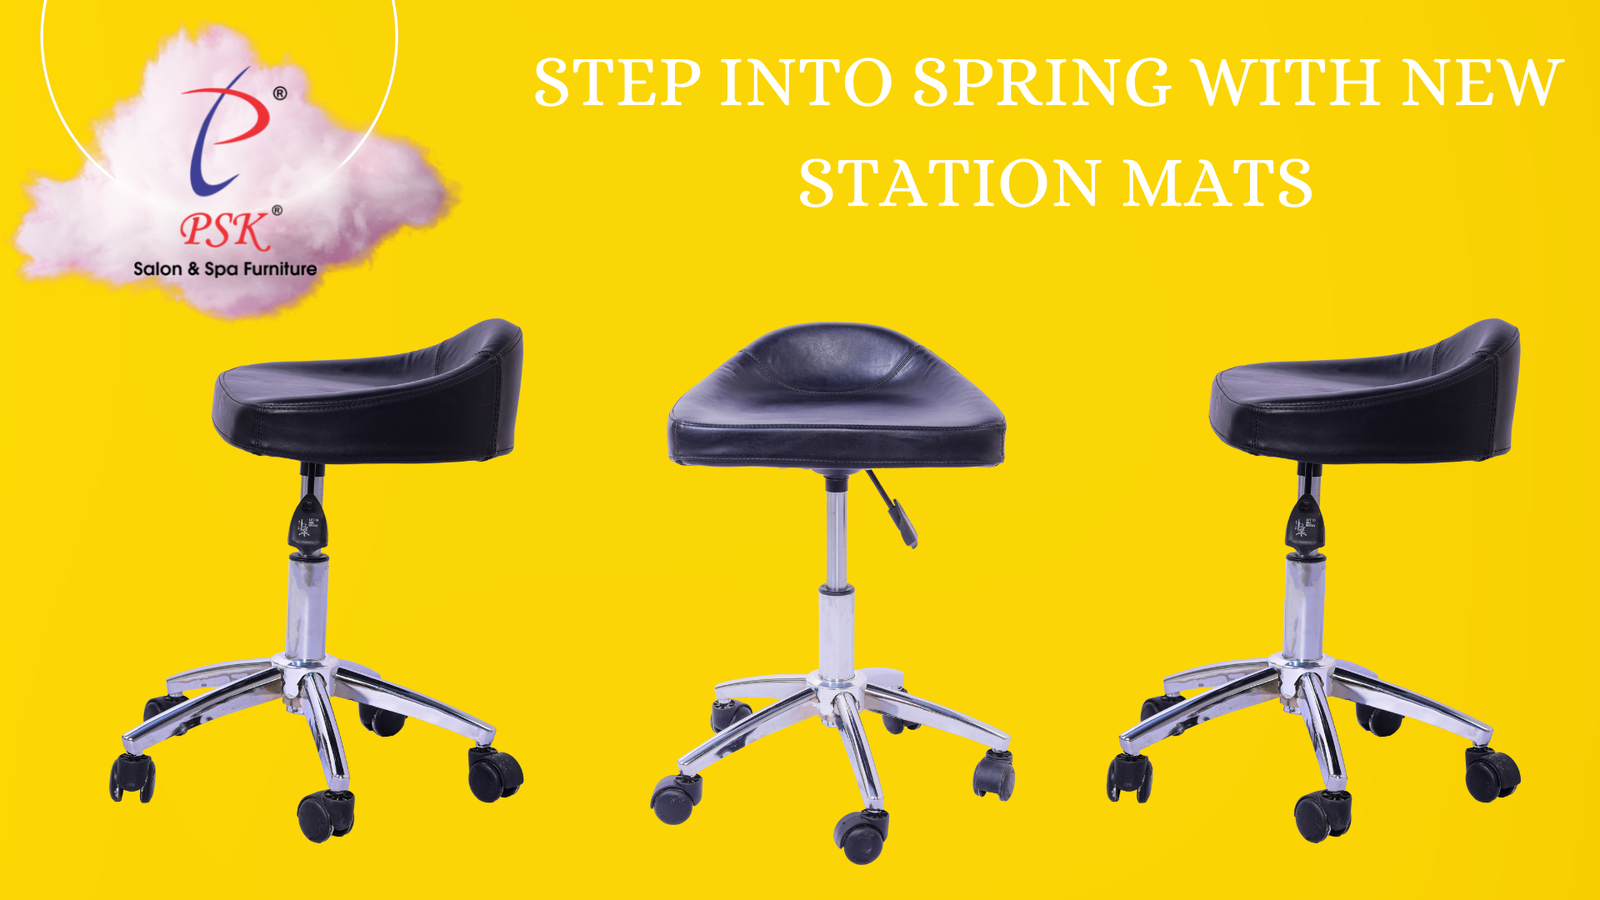 You are currently viewing STEP INTO SPRING WITH NEW STATION MATS